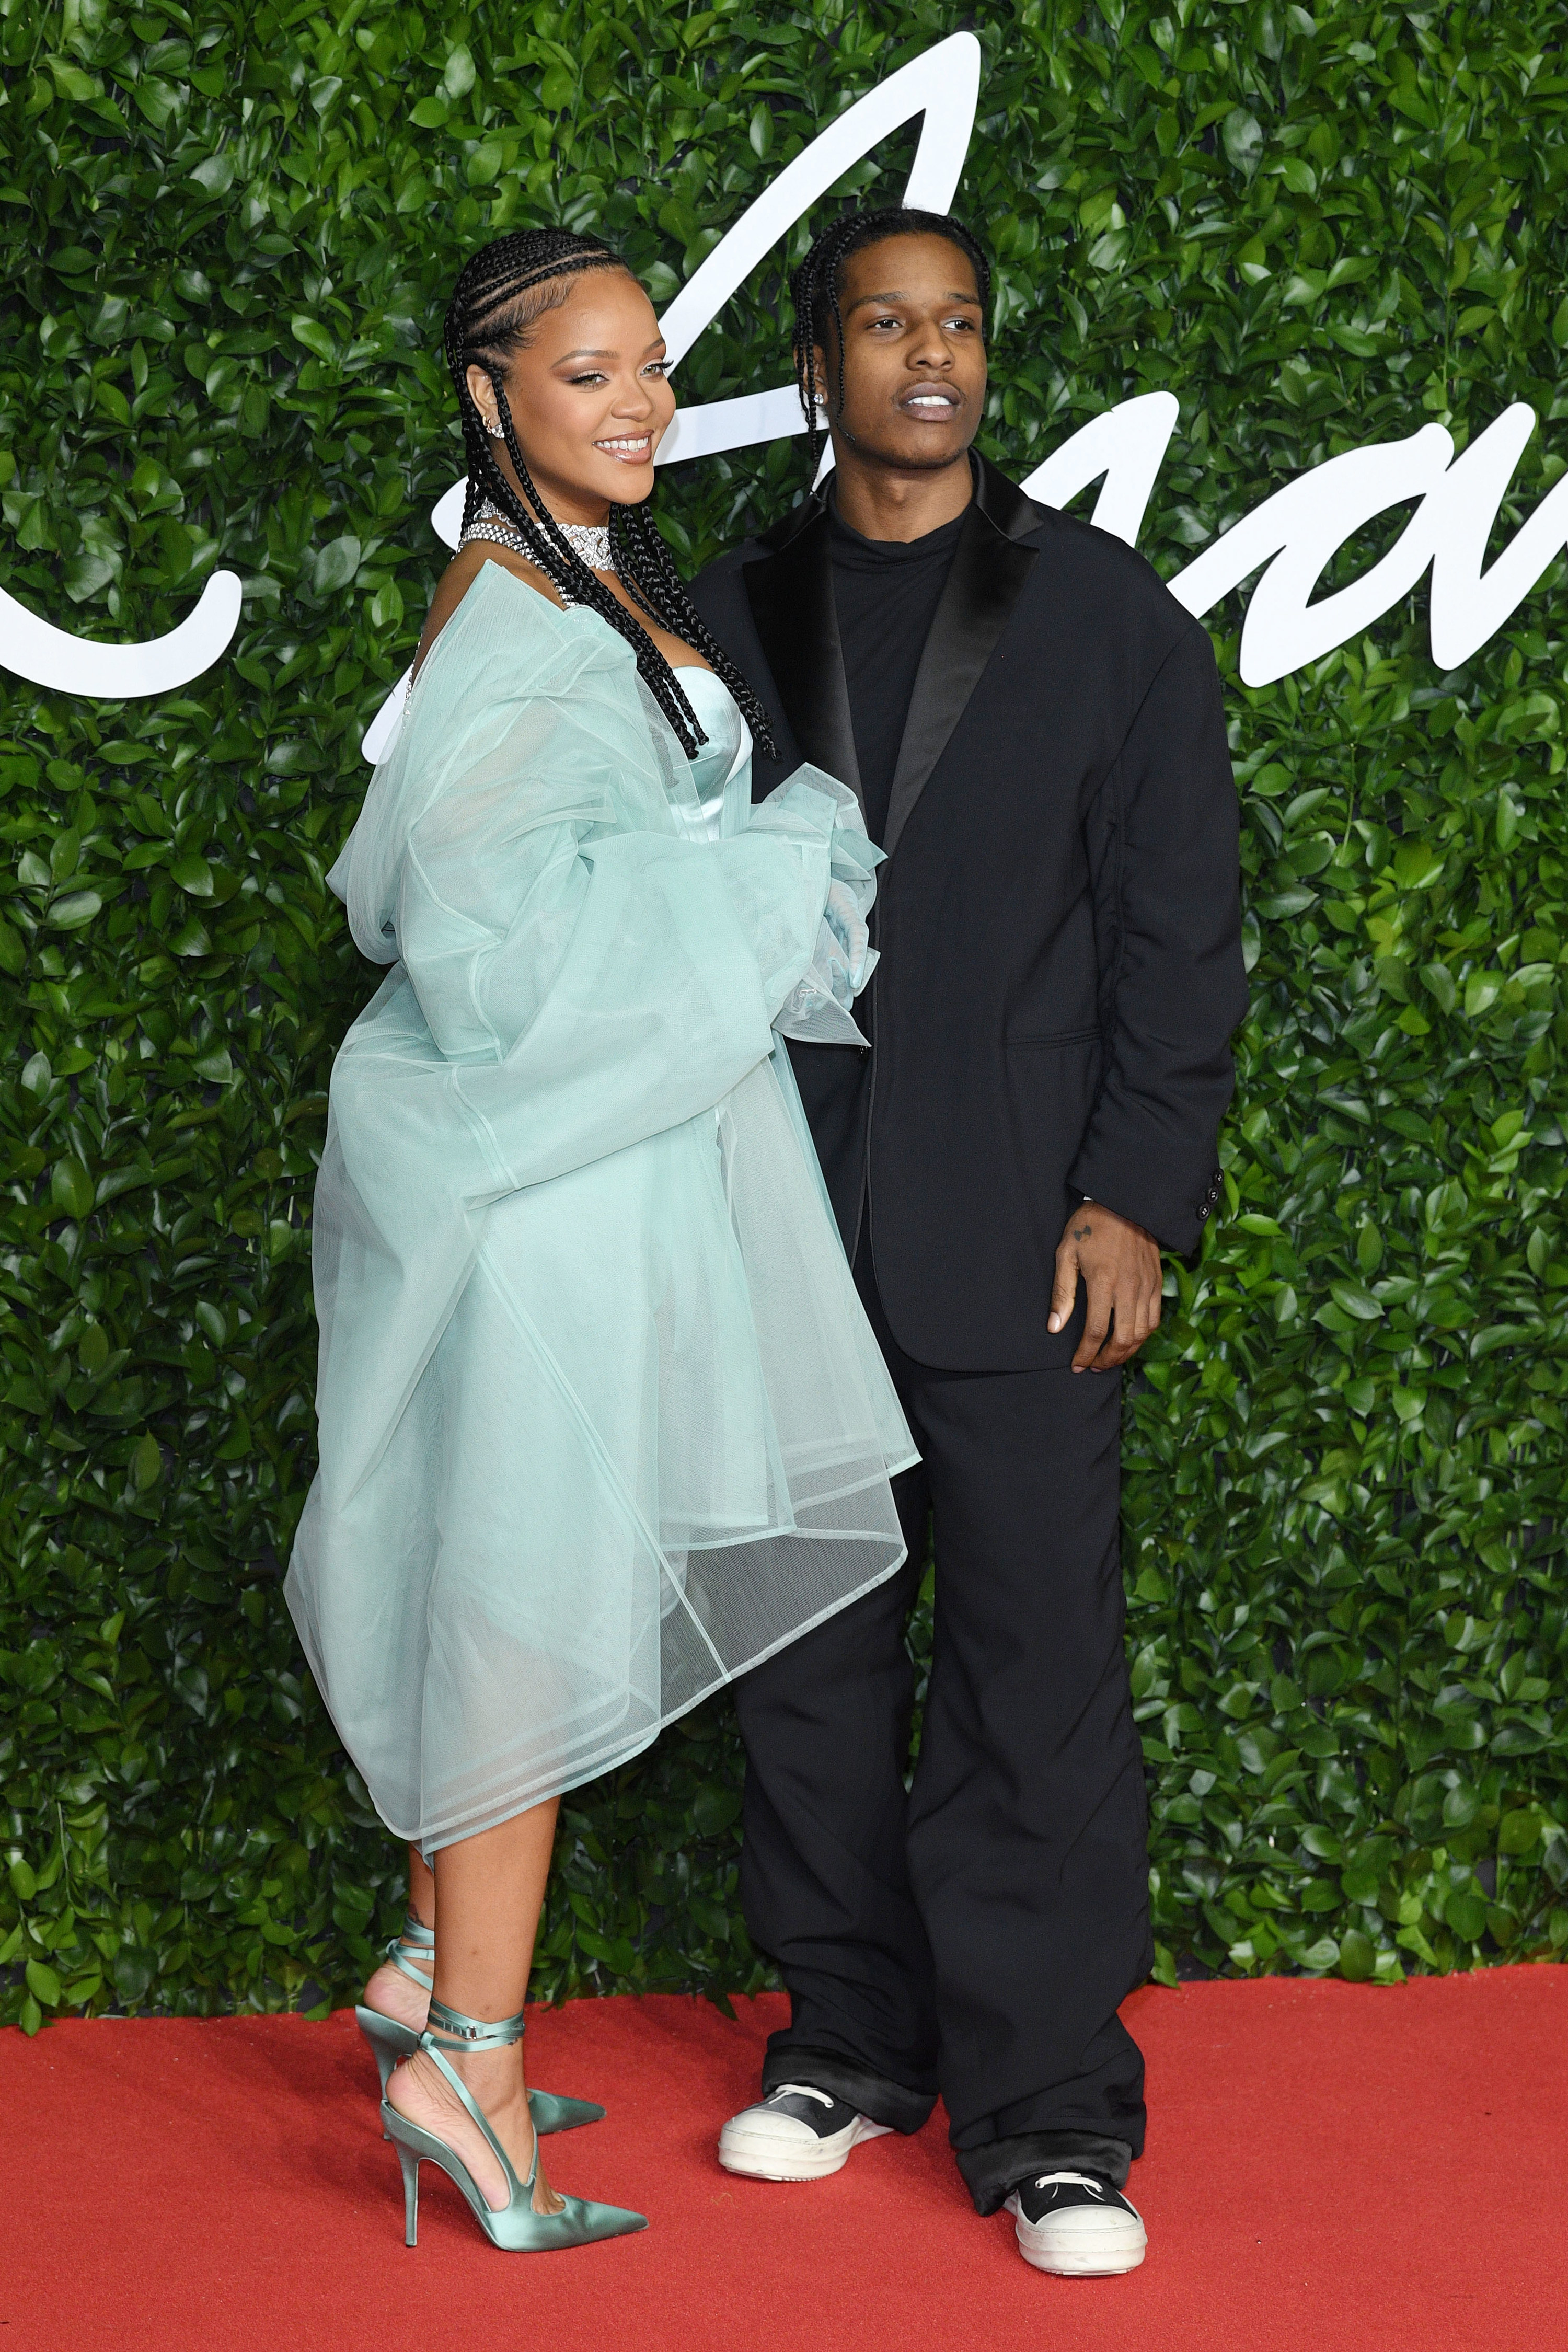 Rihanna and A$AP Rocky are pictured at a red carpet event in 2019